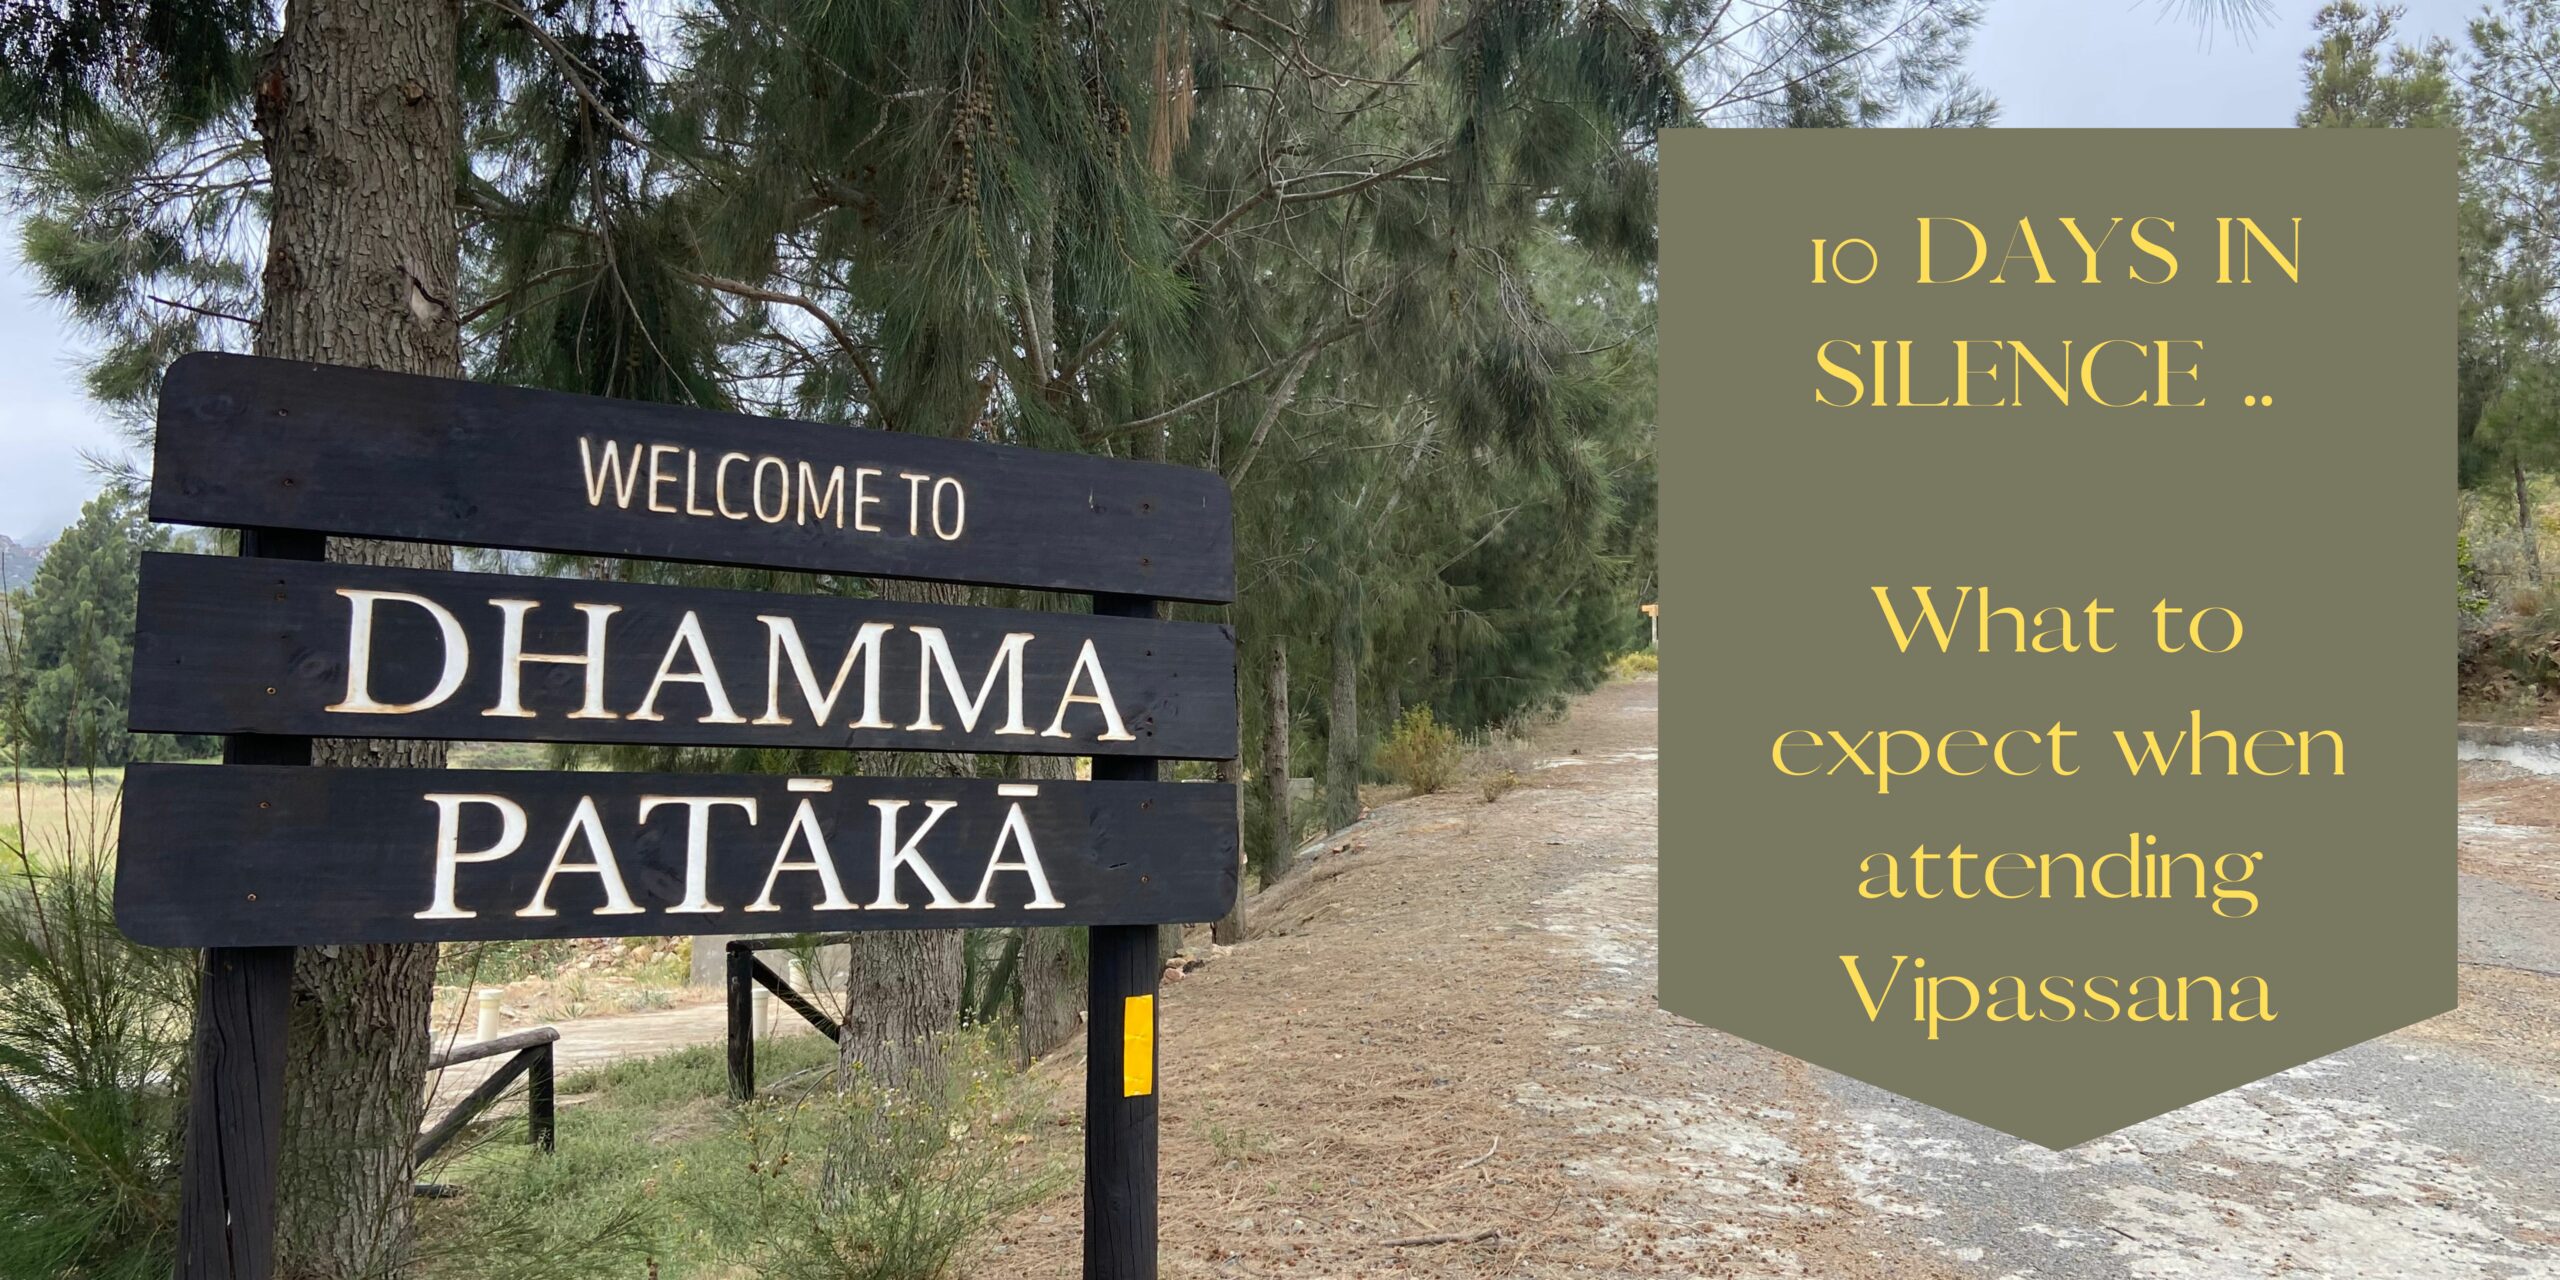 10 DAYS IN SILENCE .. What to expect when attending Vipassana